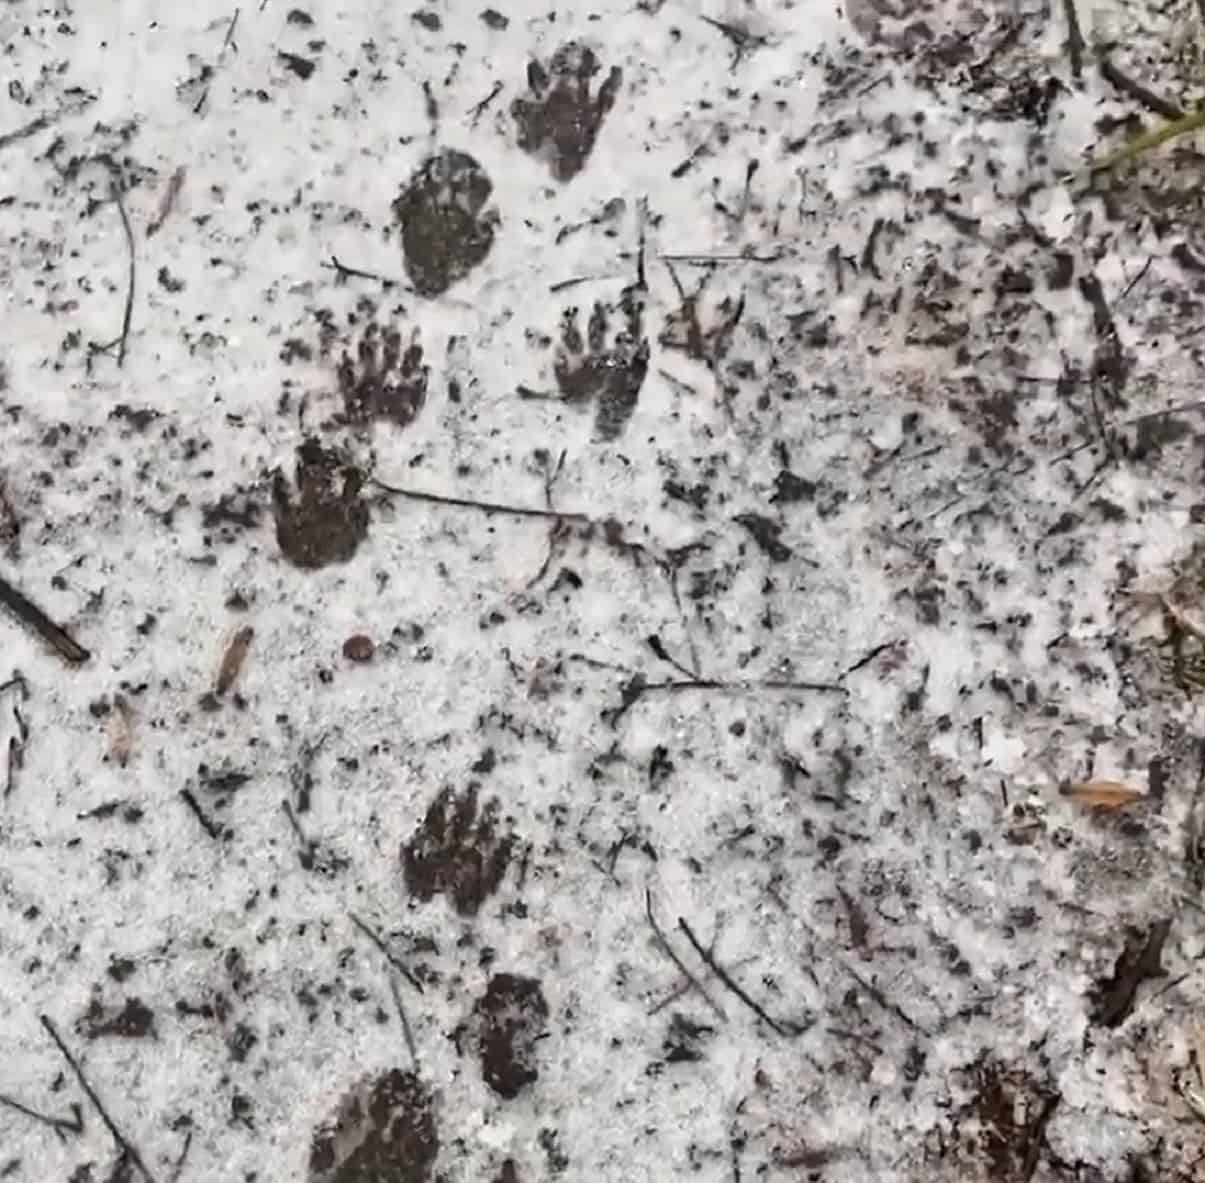 More Raccoon Tracks in the snow